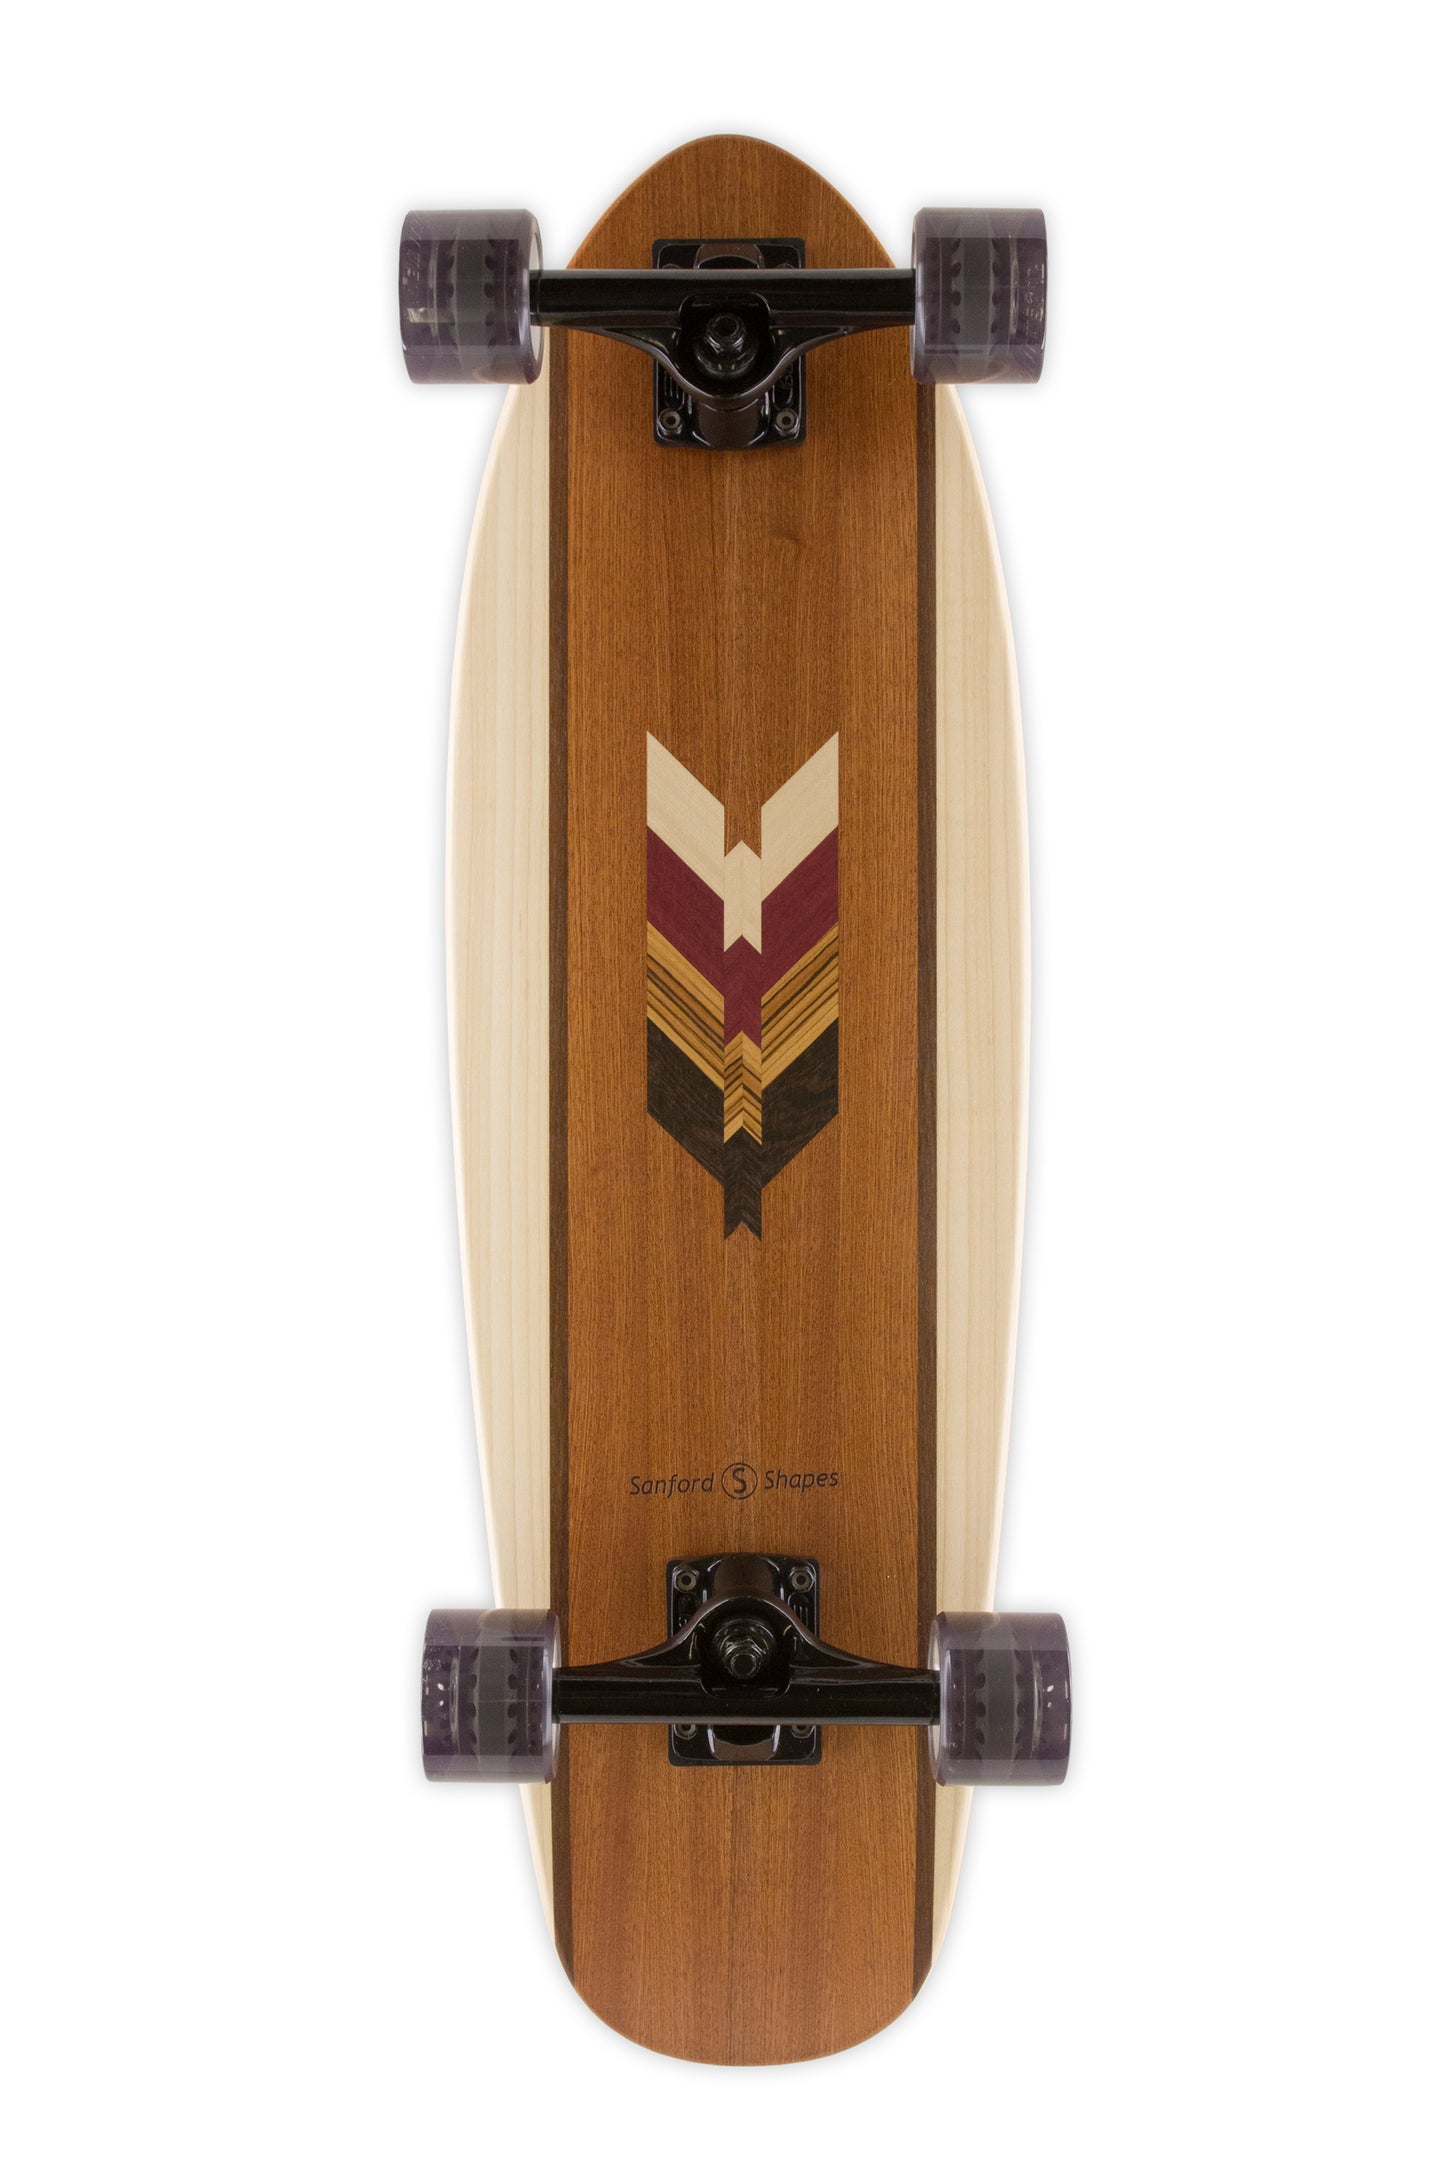 FREEDOM SMALL COMPLETE SKATEBOARD 29"